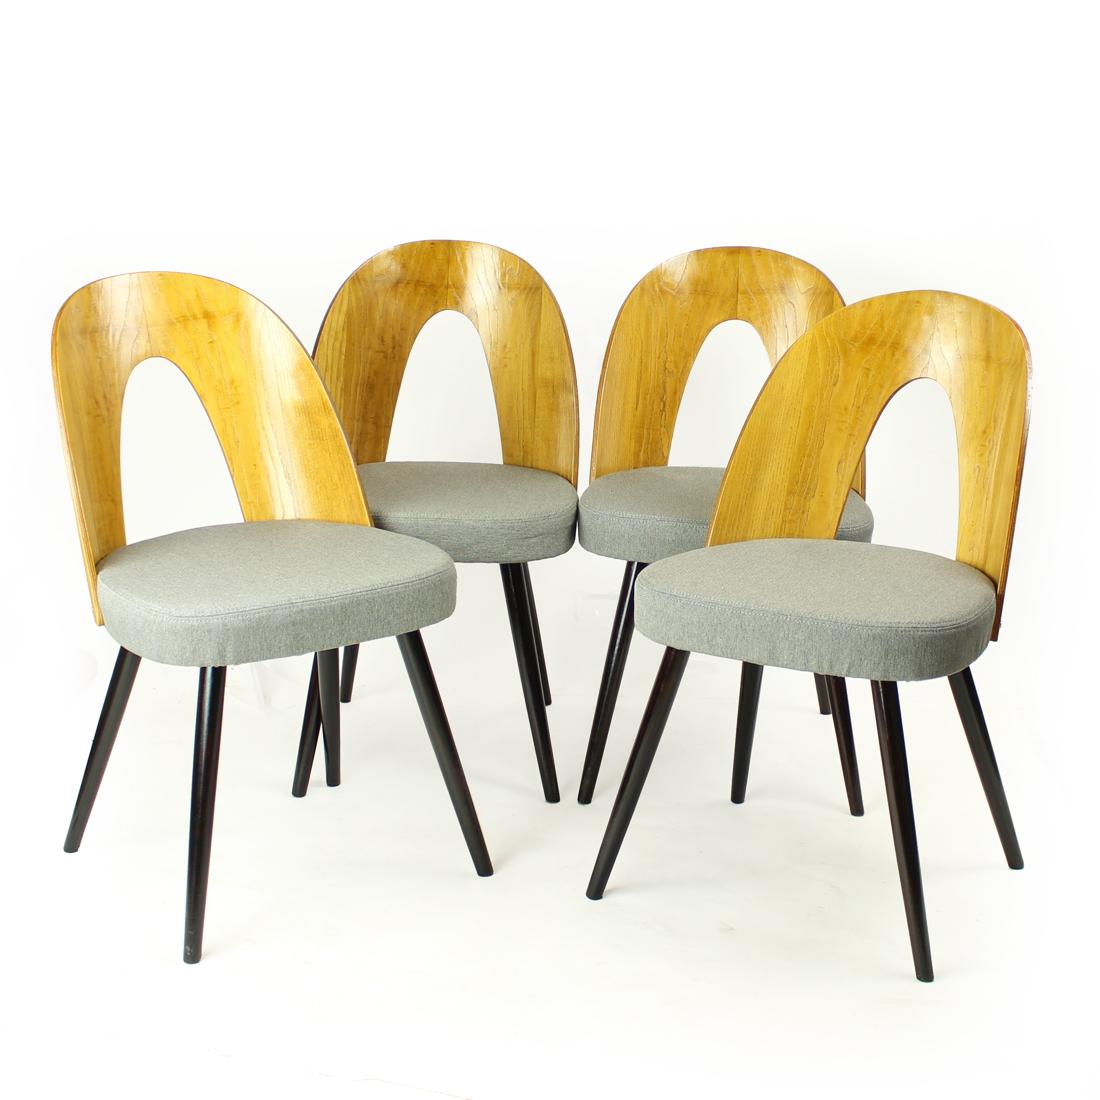 The iconic Tatra Chairs produced by Tatra Furniture in Pravenec, Czechoslovakia in 1960s. Designed by Antonin Šuman. The set is completely restored with the base being in darker brown stain and backrest in a new oak veneer. The original backrest was